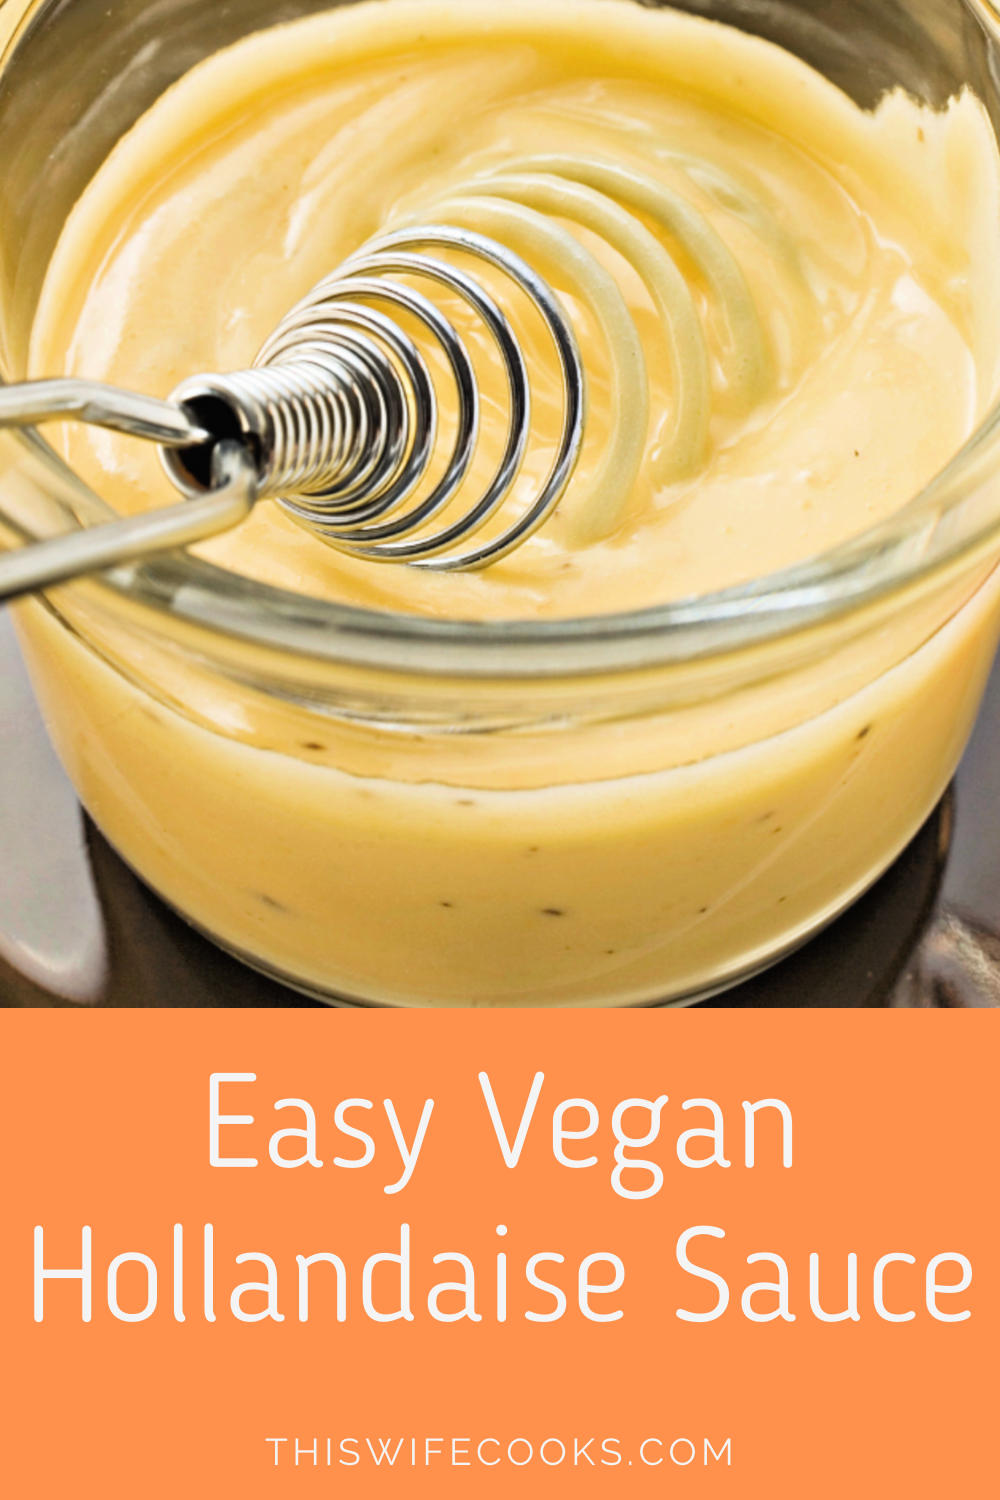 Easy Vegan Hollandaise Sauce - A rich, creamy, upgrade to the classic sauce and the flavor is exactly what you remember of the egg-based version!

#veganhollandaise #thiswifecooksrecipes #veganeasterresipes #veganbrunchrecipes #dairyfreehollandaise #eggfreehollandaise via @thiswifecooks